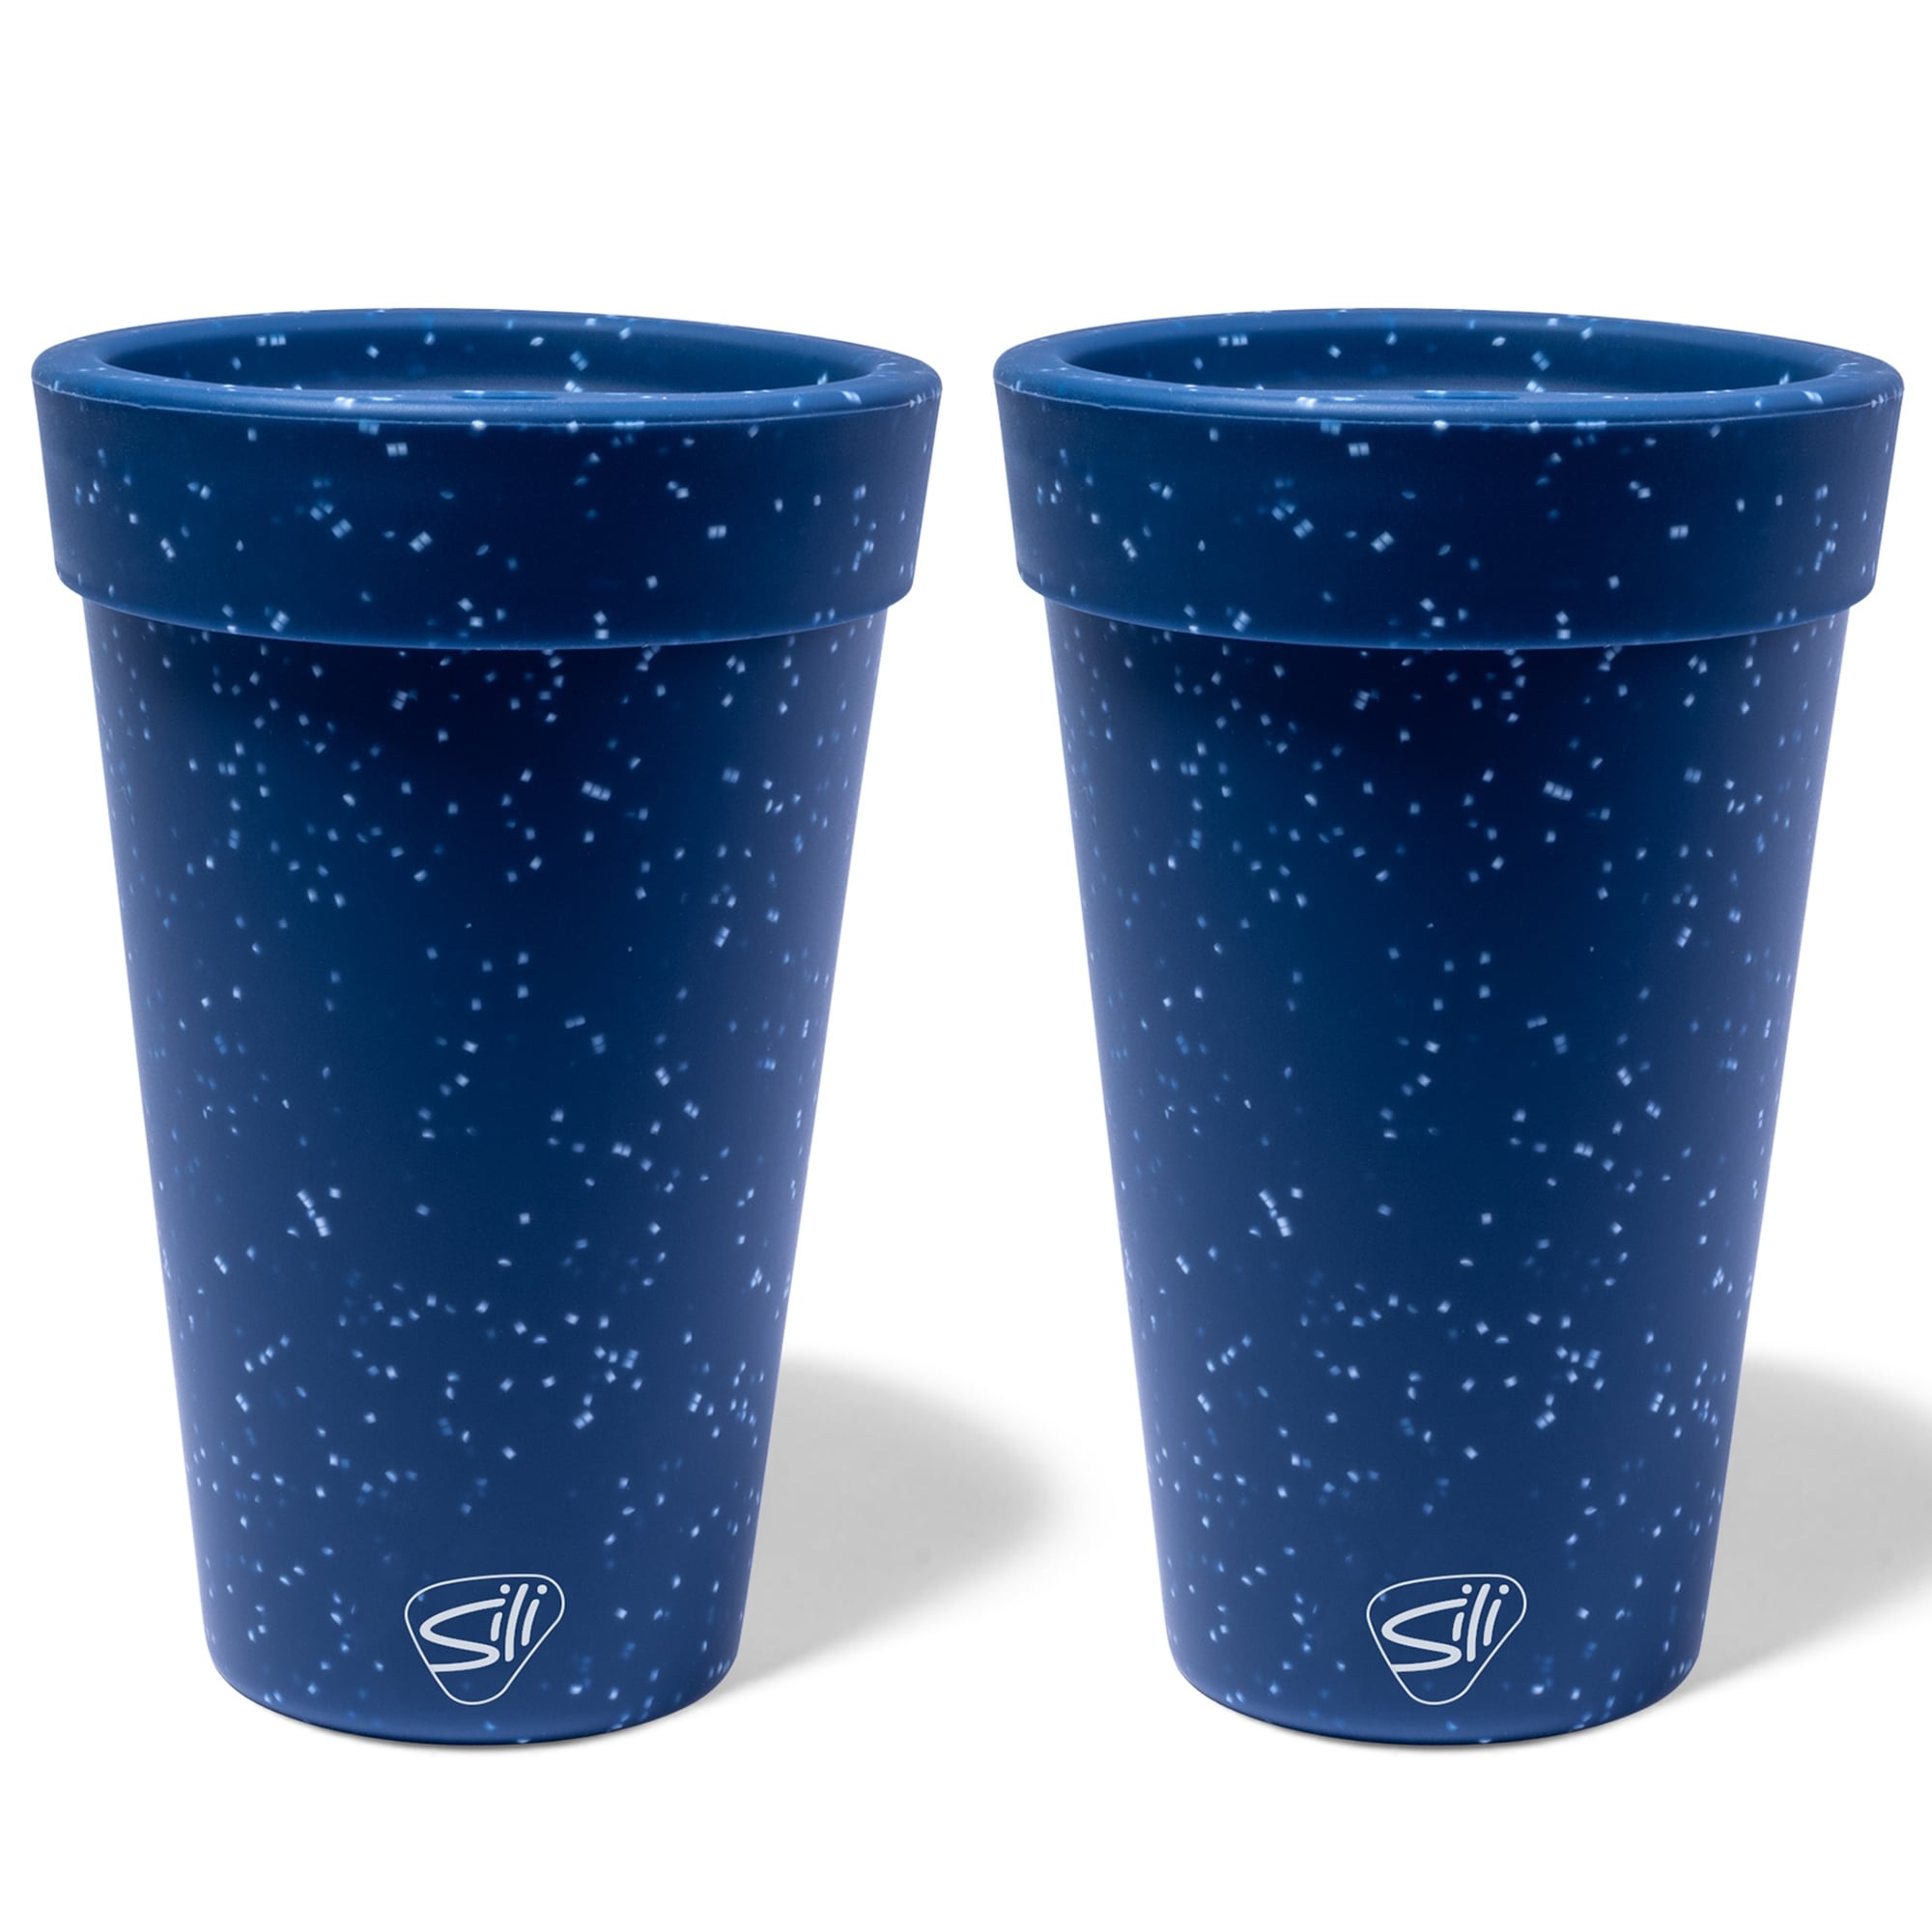 https://ak1.ostkcdn.com/images/products/is/images/direct/604dcfd7e820e94df77ff6dfccb216f8eff8cce1/Silipint%3A-Silicone-16oz-Coffee-Tumblers%3A-2-Pack-Blue-Speckled---Unbreakable-Cups%2C-Reusable%2C-Flexible%2C-Hot-%26-Cold-Drinks.jpg